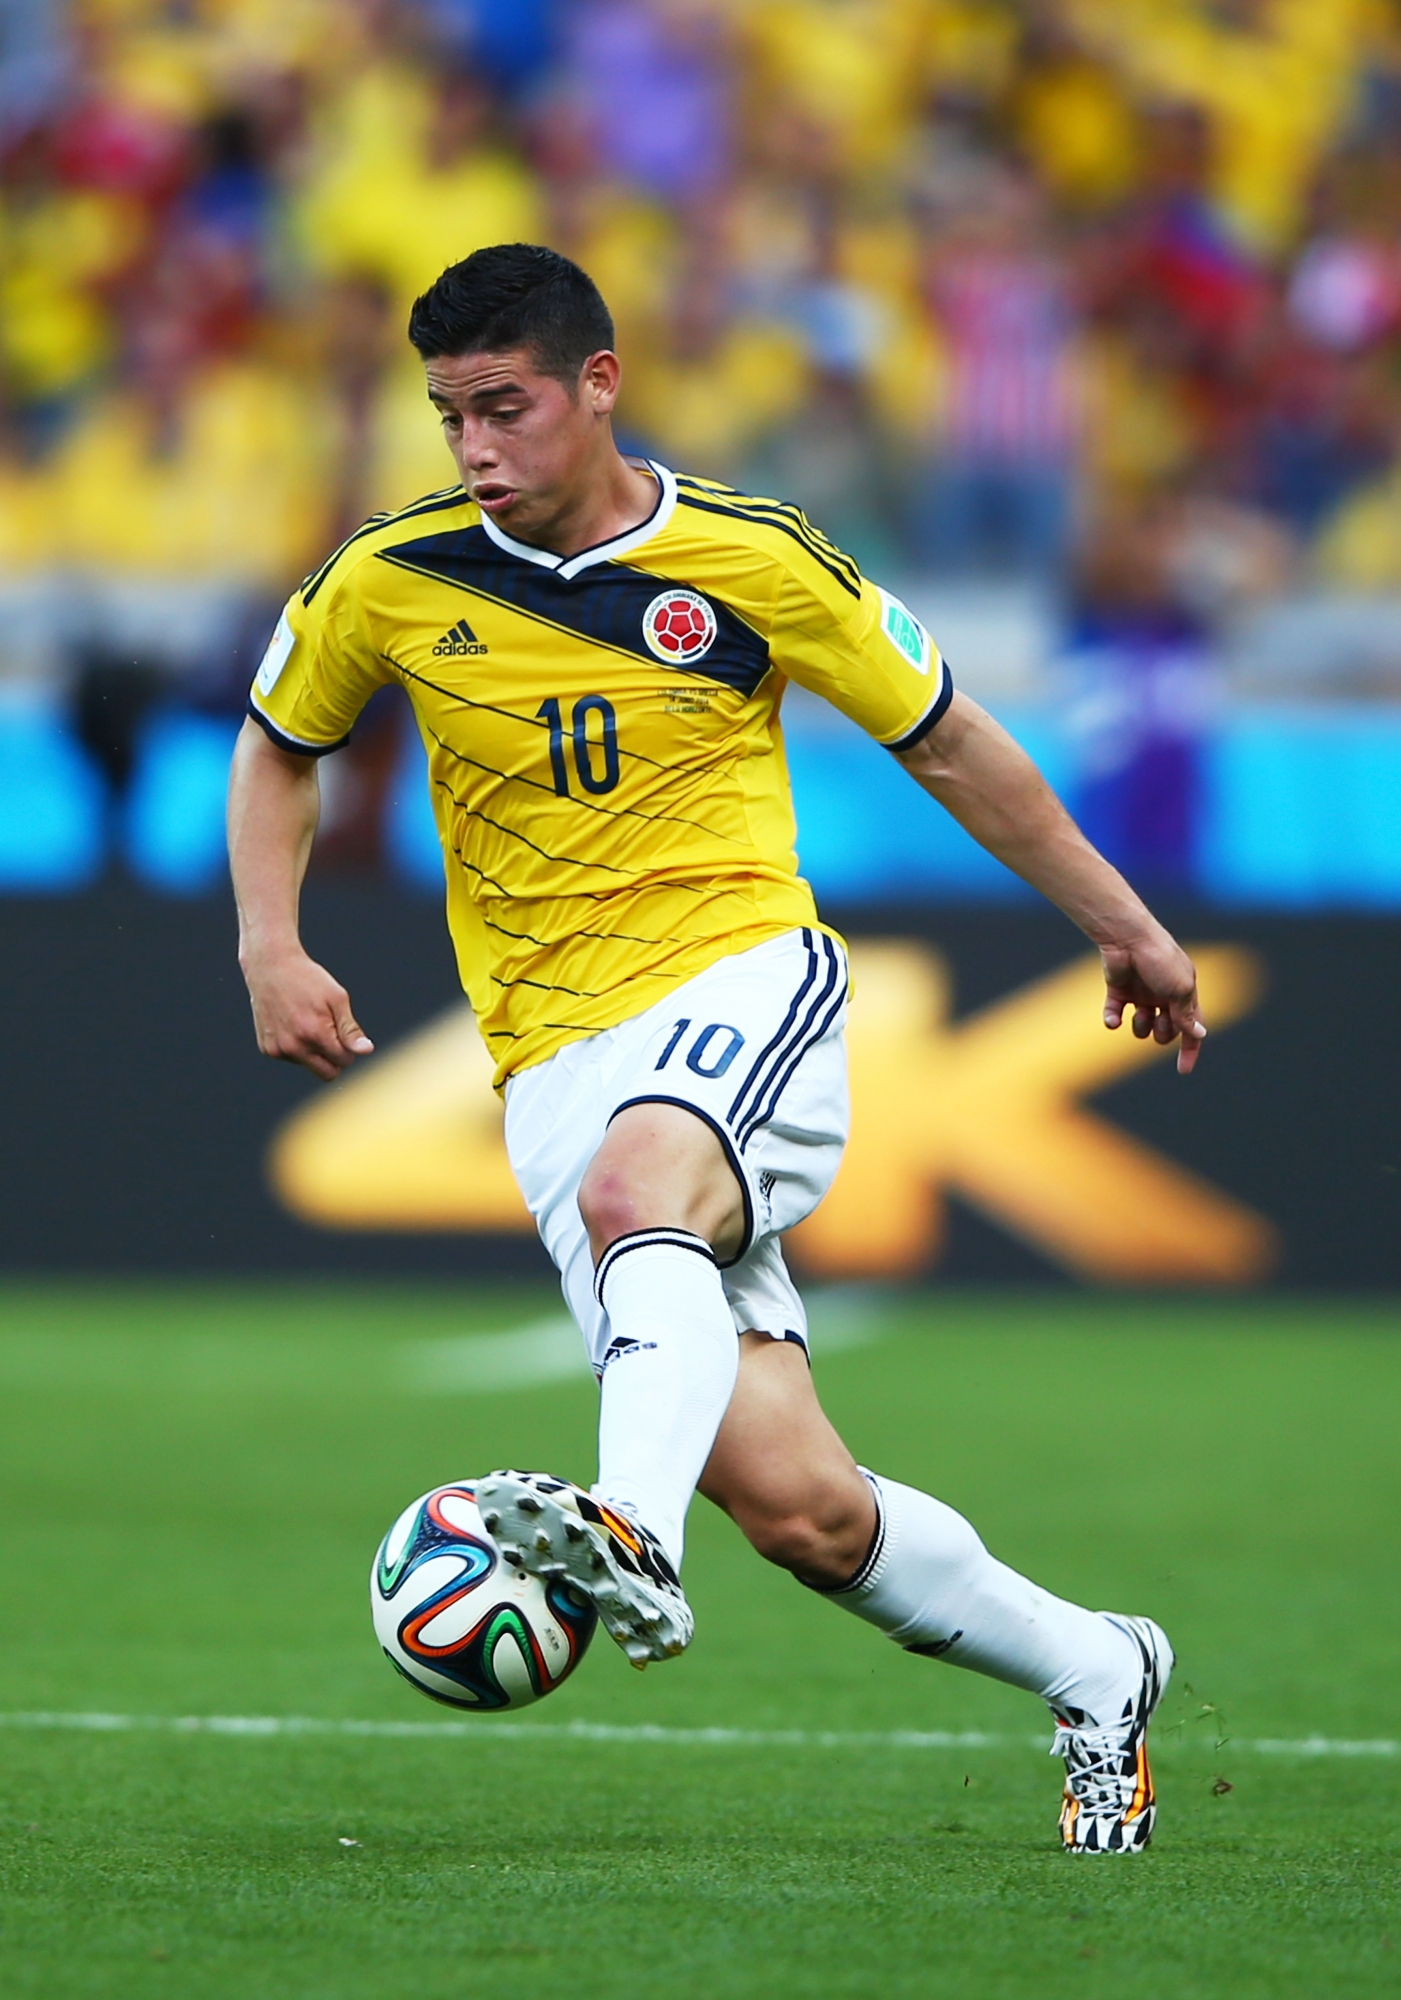 James Rodriguez #646780 Wallpapers High Quality | Download Free